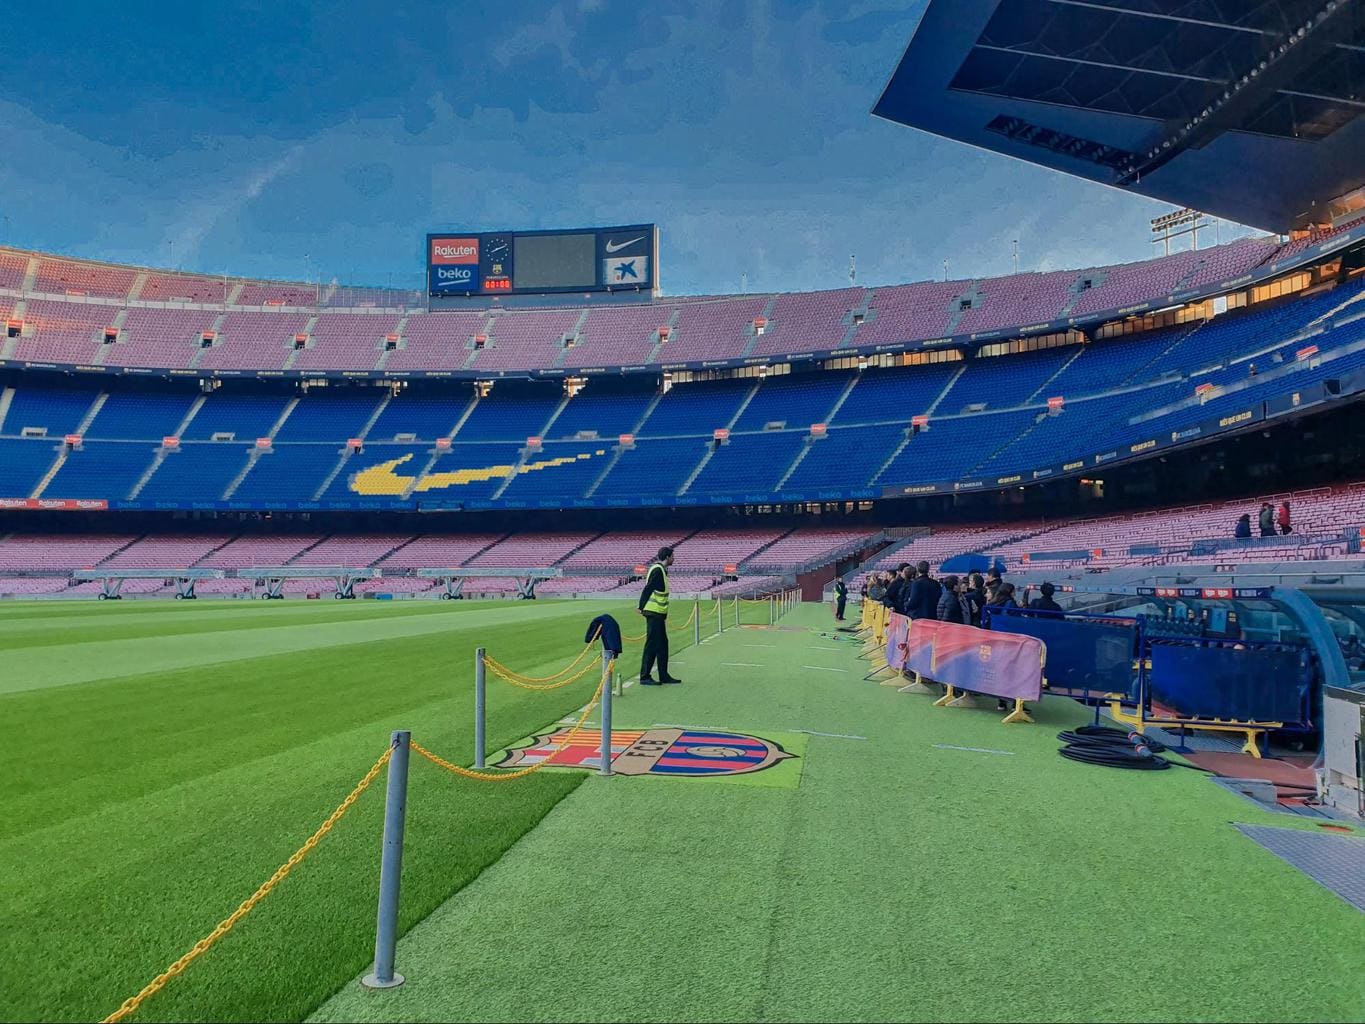 Walk and touch the grass during the Players Experience Camp Nou tour